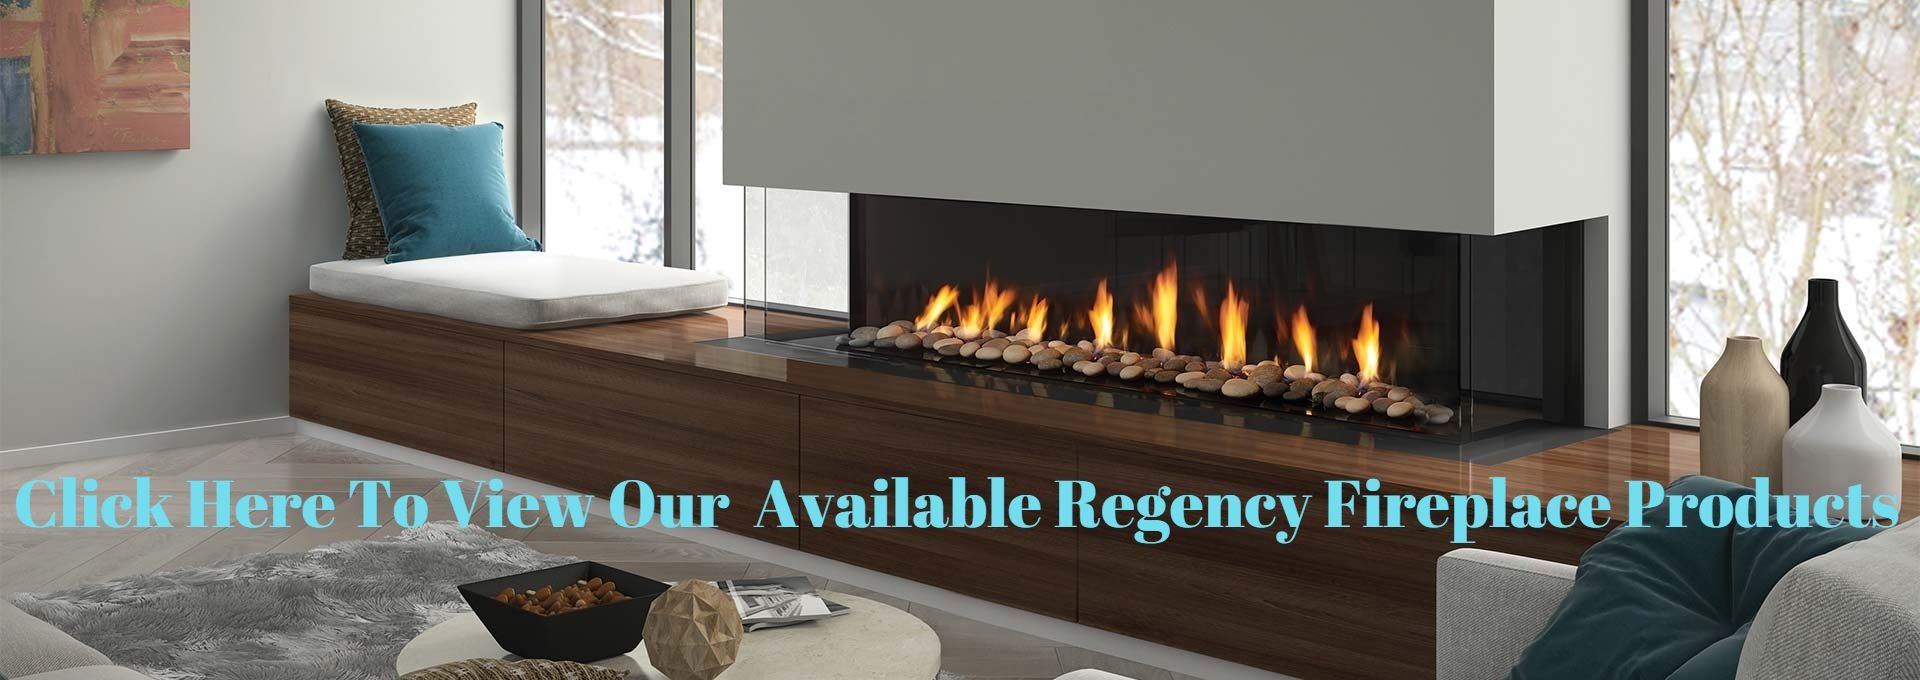 Click to view our available Regency fireplace products